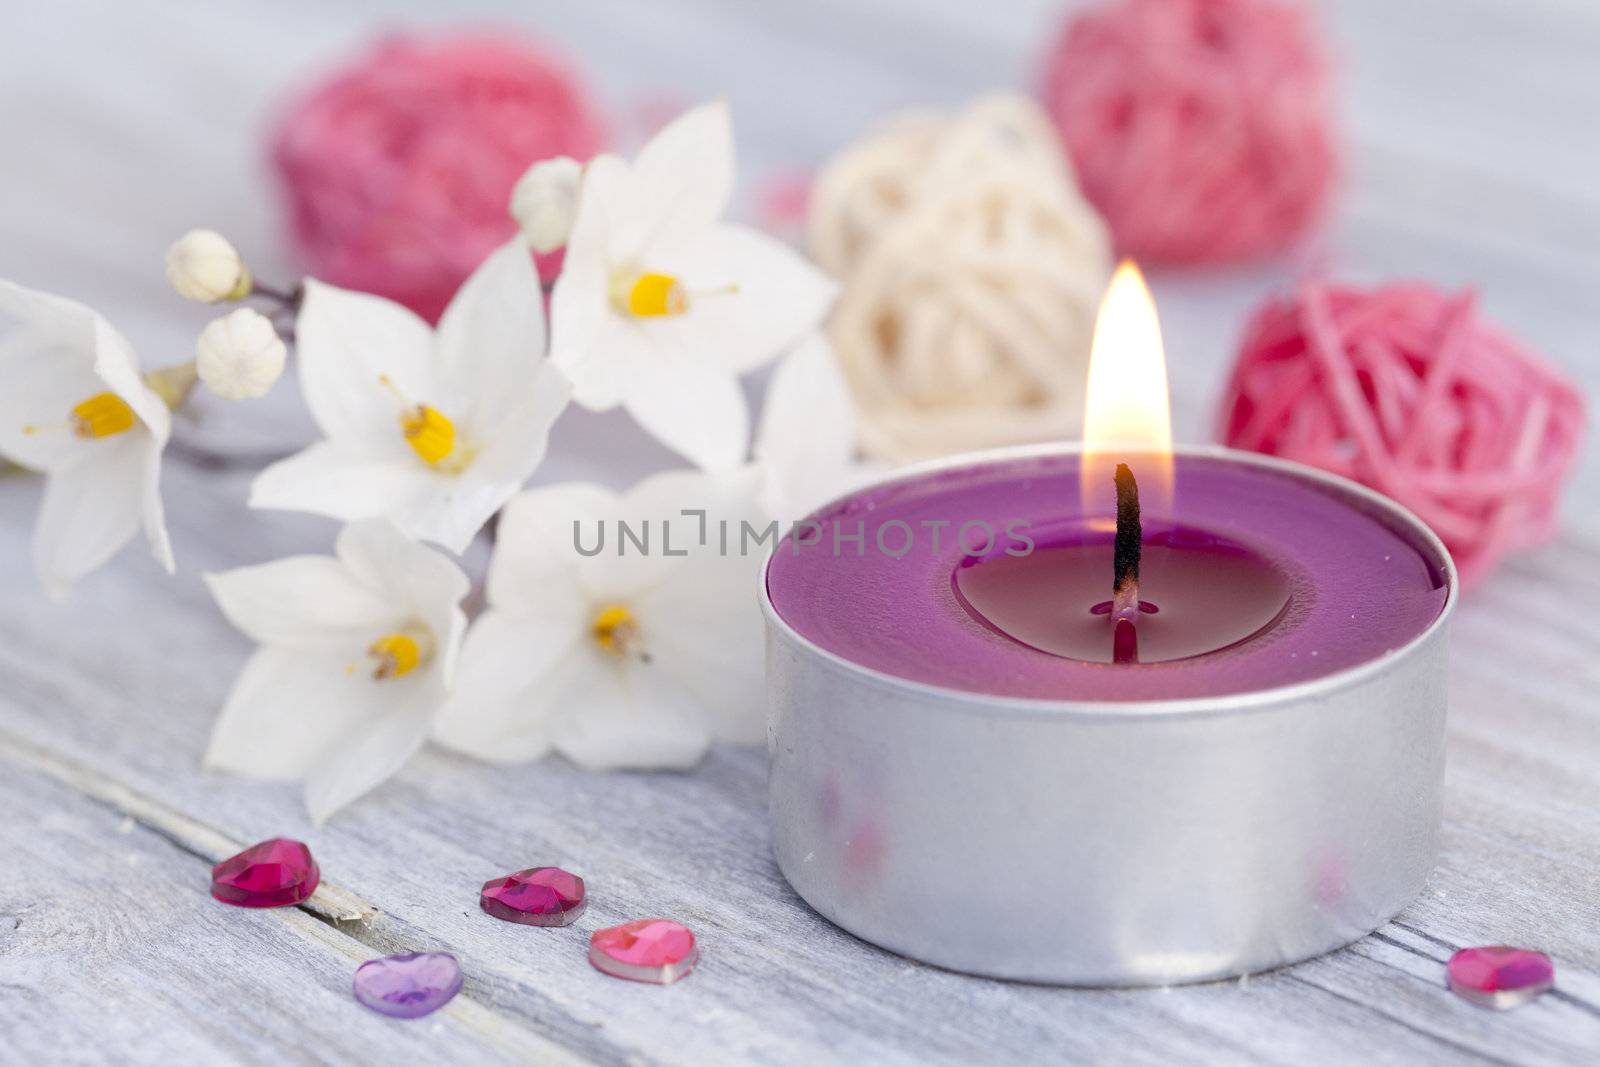 Wellness with candle light by Bestpictures